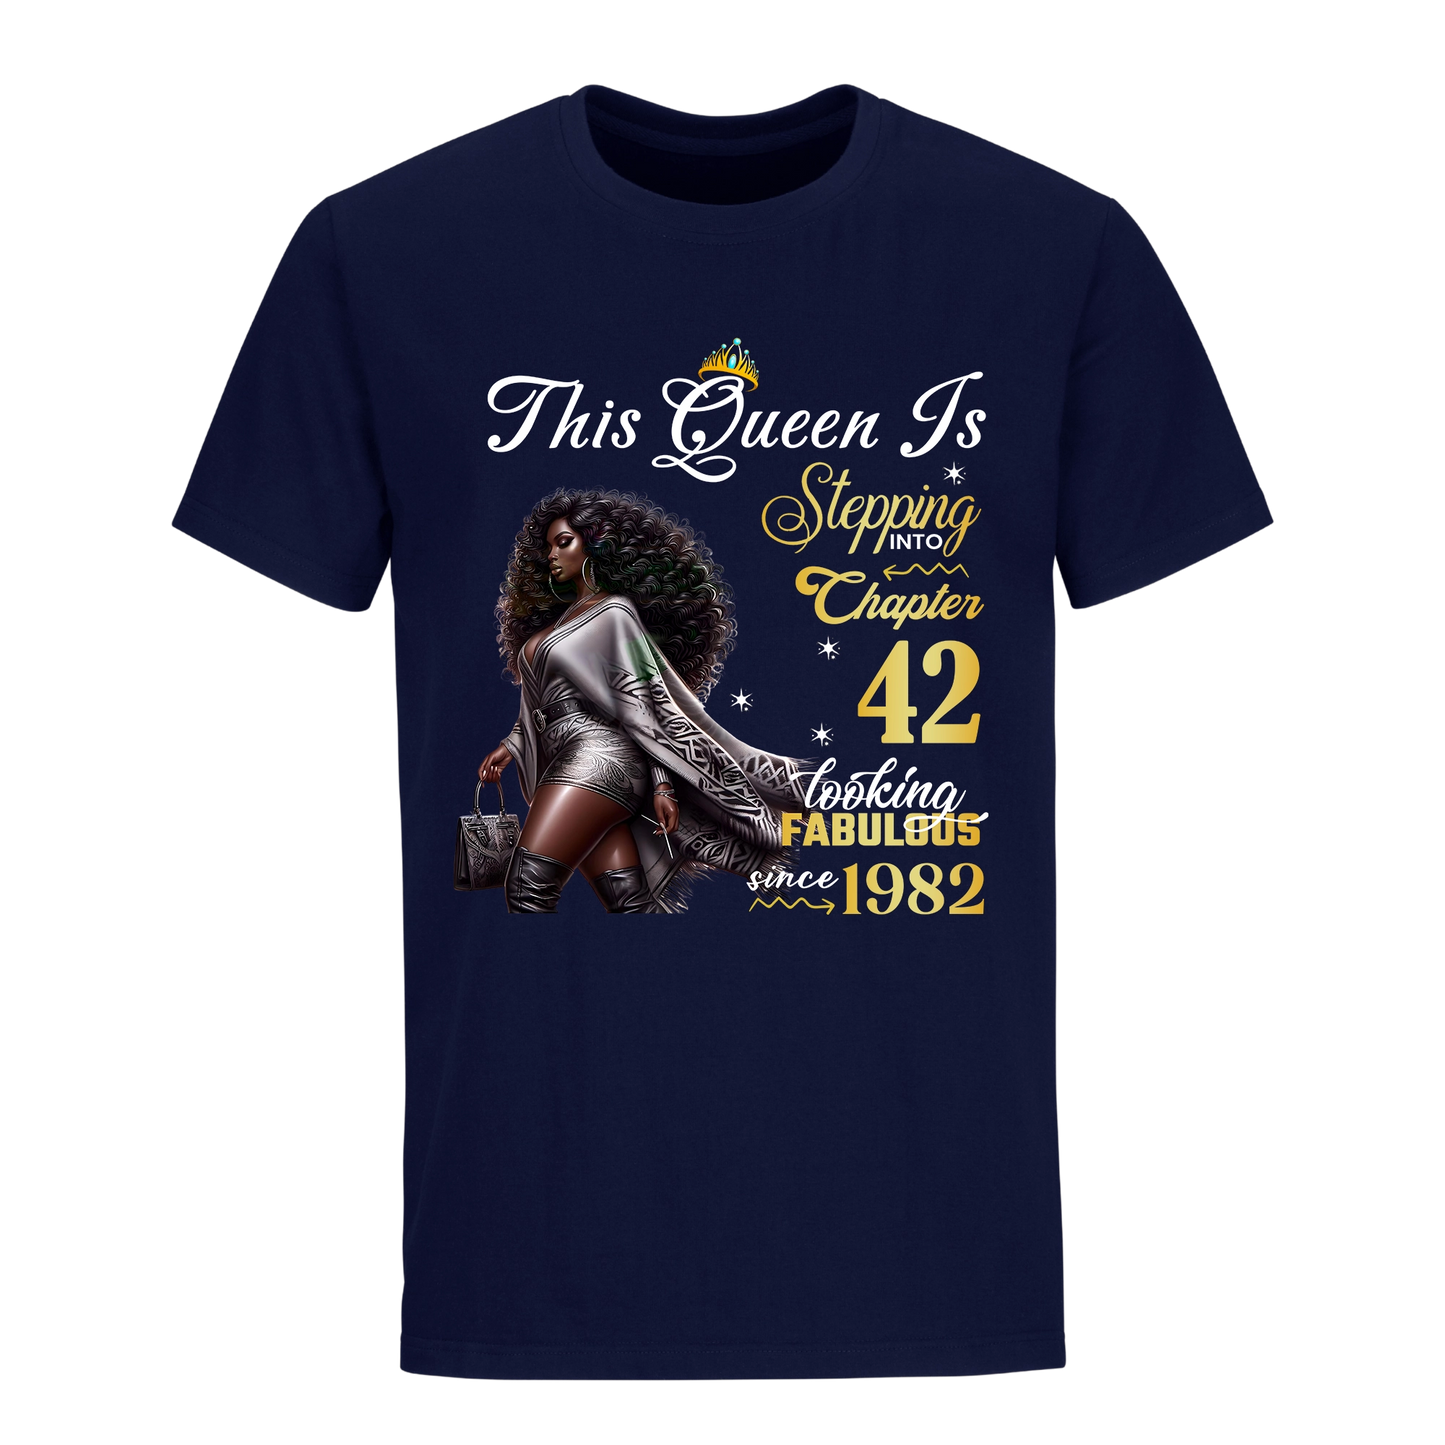 THIS QUEEN IS FABULOUS 42 UNISEX SHIRT